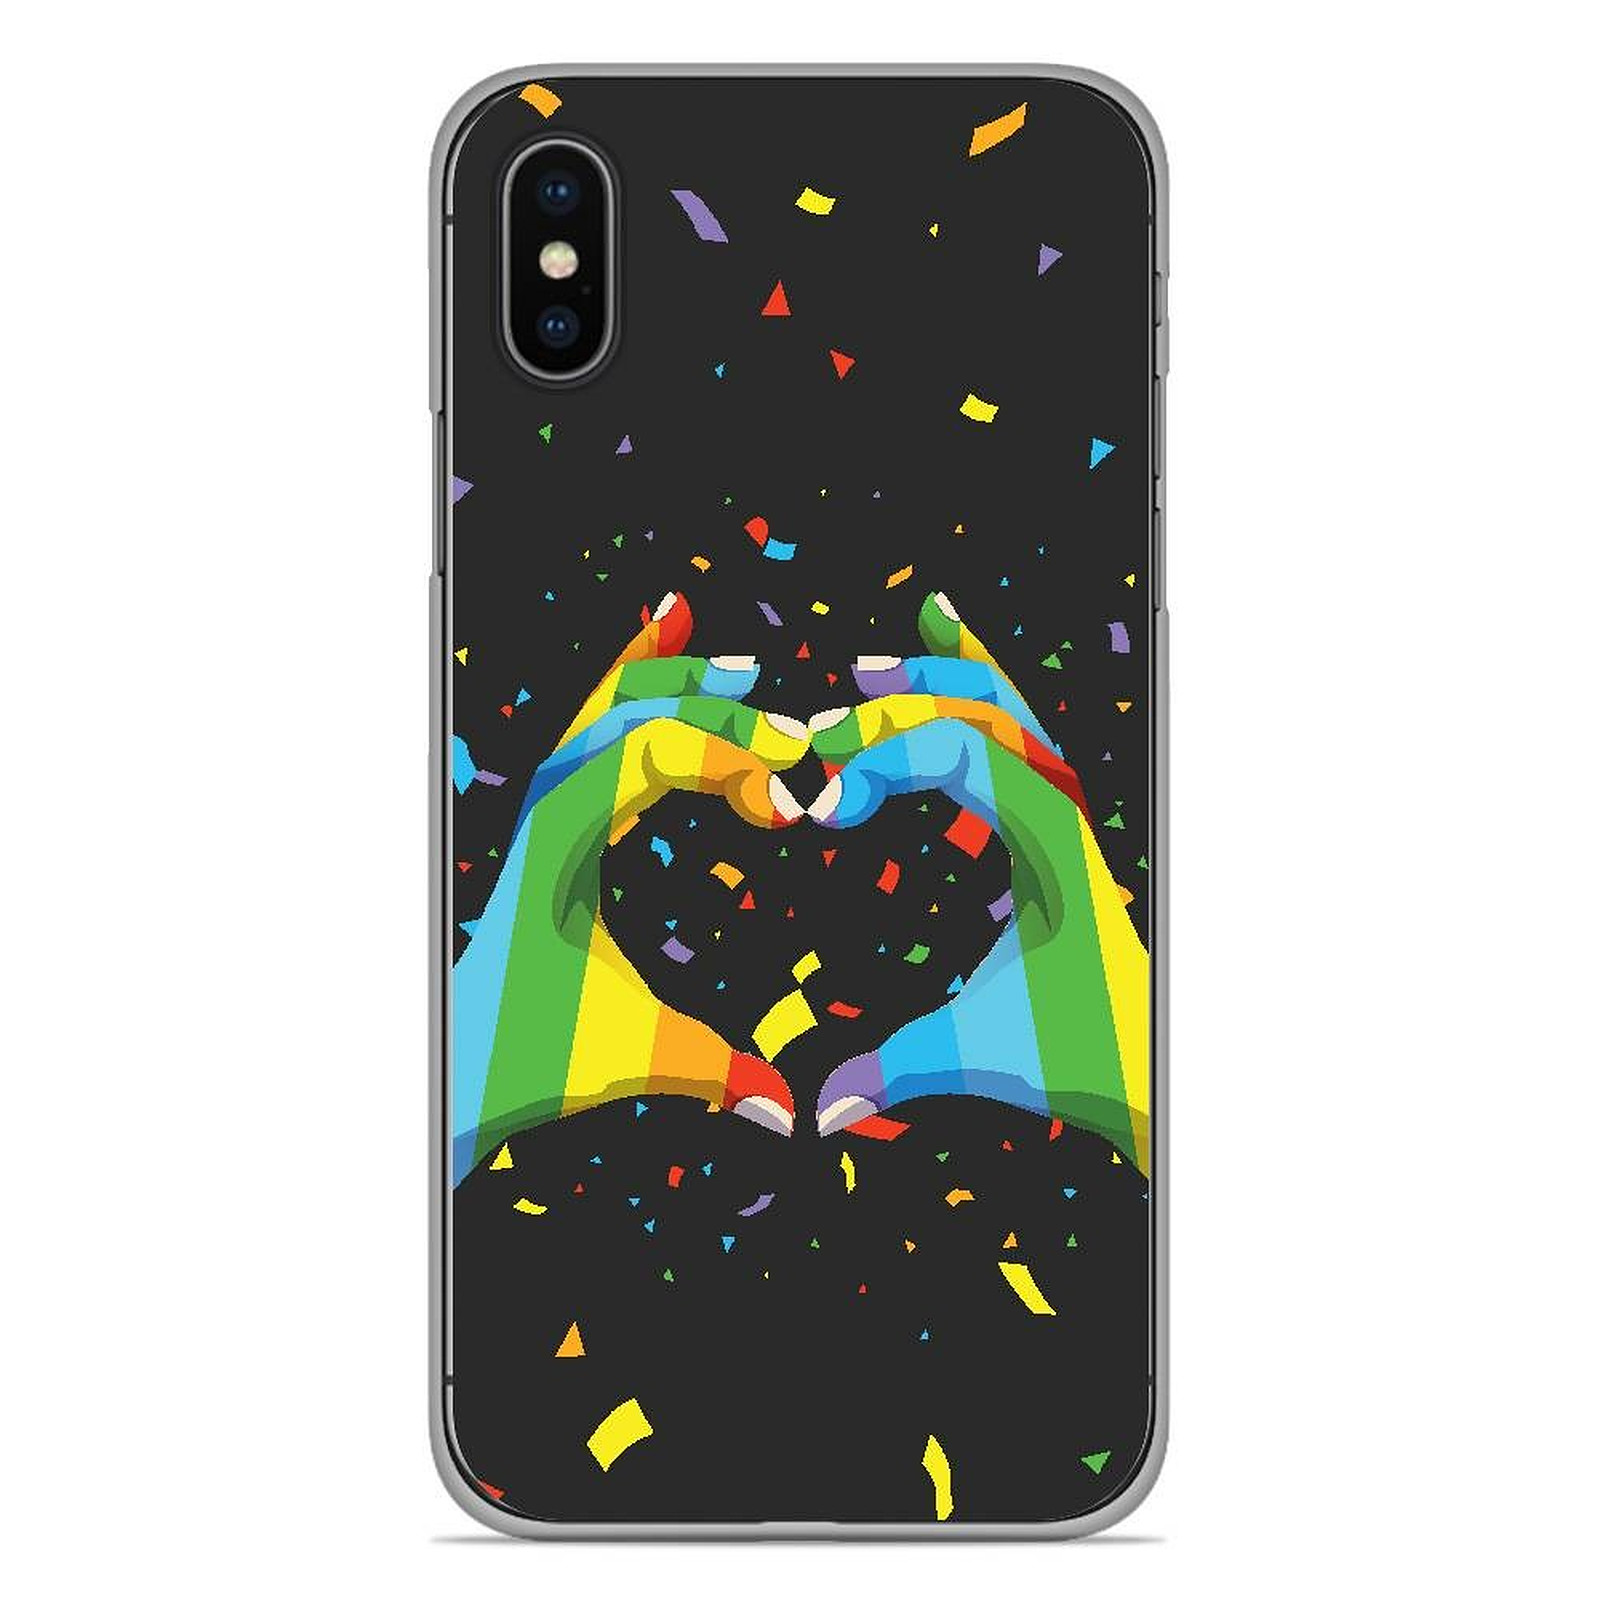 1001 Coques Coque silicone gel Apple iPhone X / XS motif LGBT - Coque telephone 1001Coques